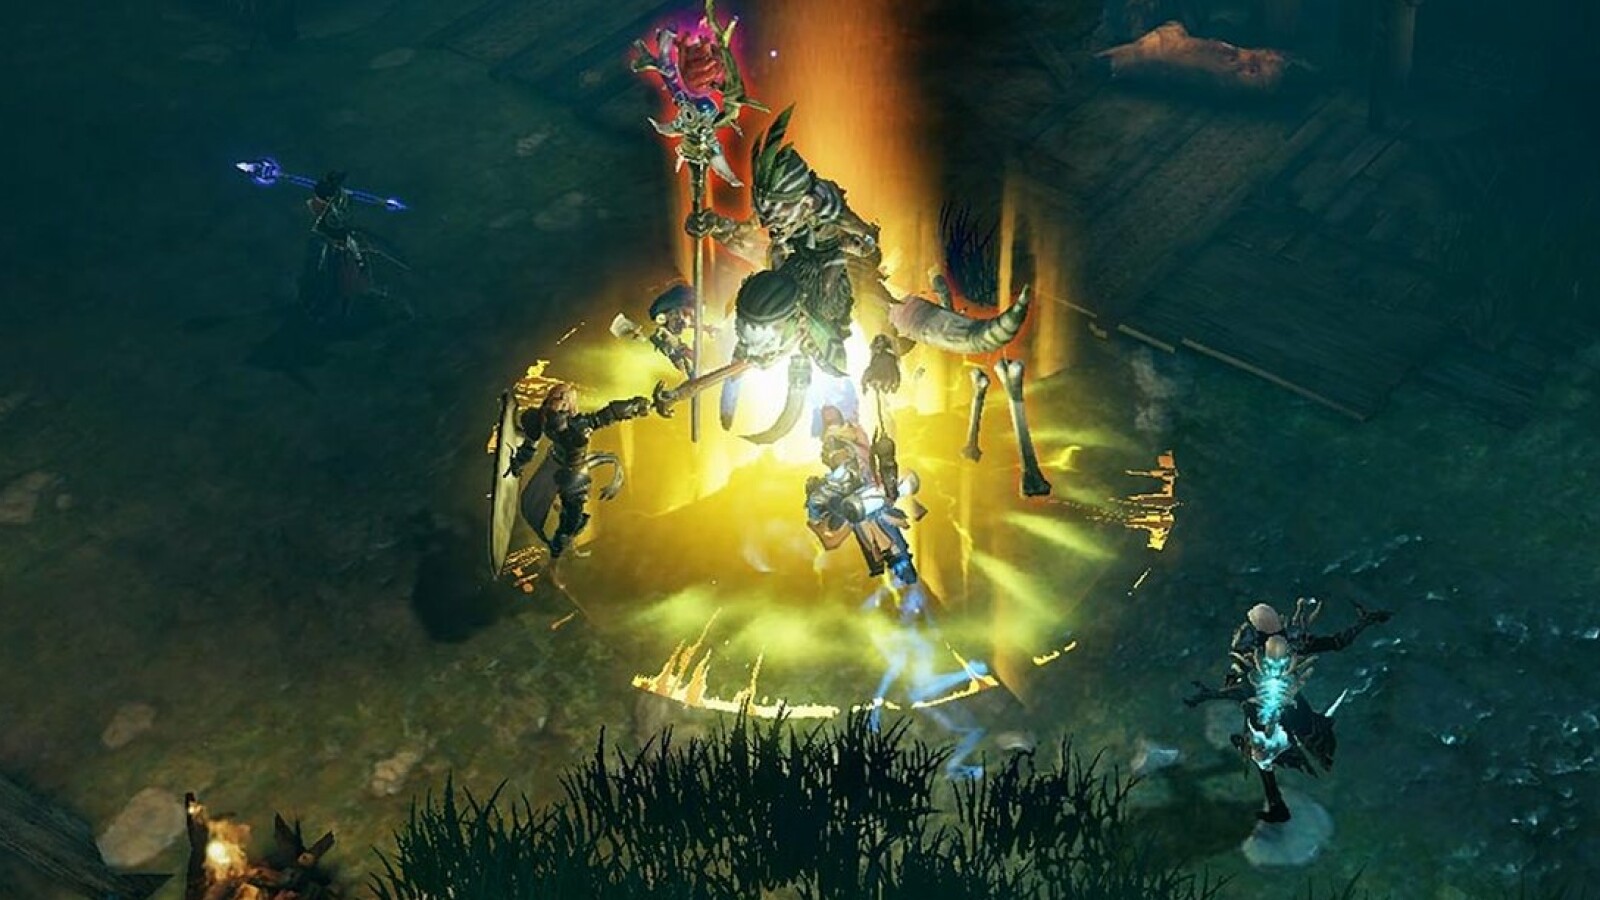 diablo immortal mobile game trailer compairison to other games in china